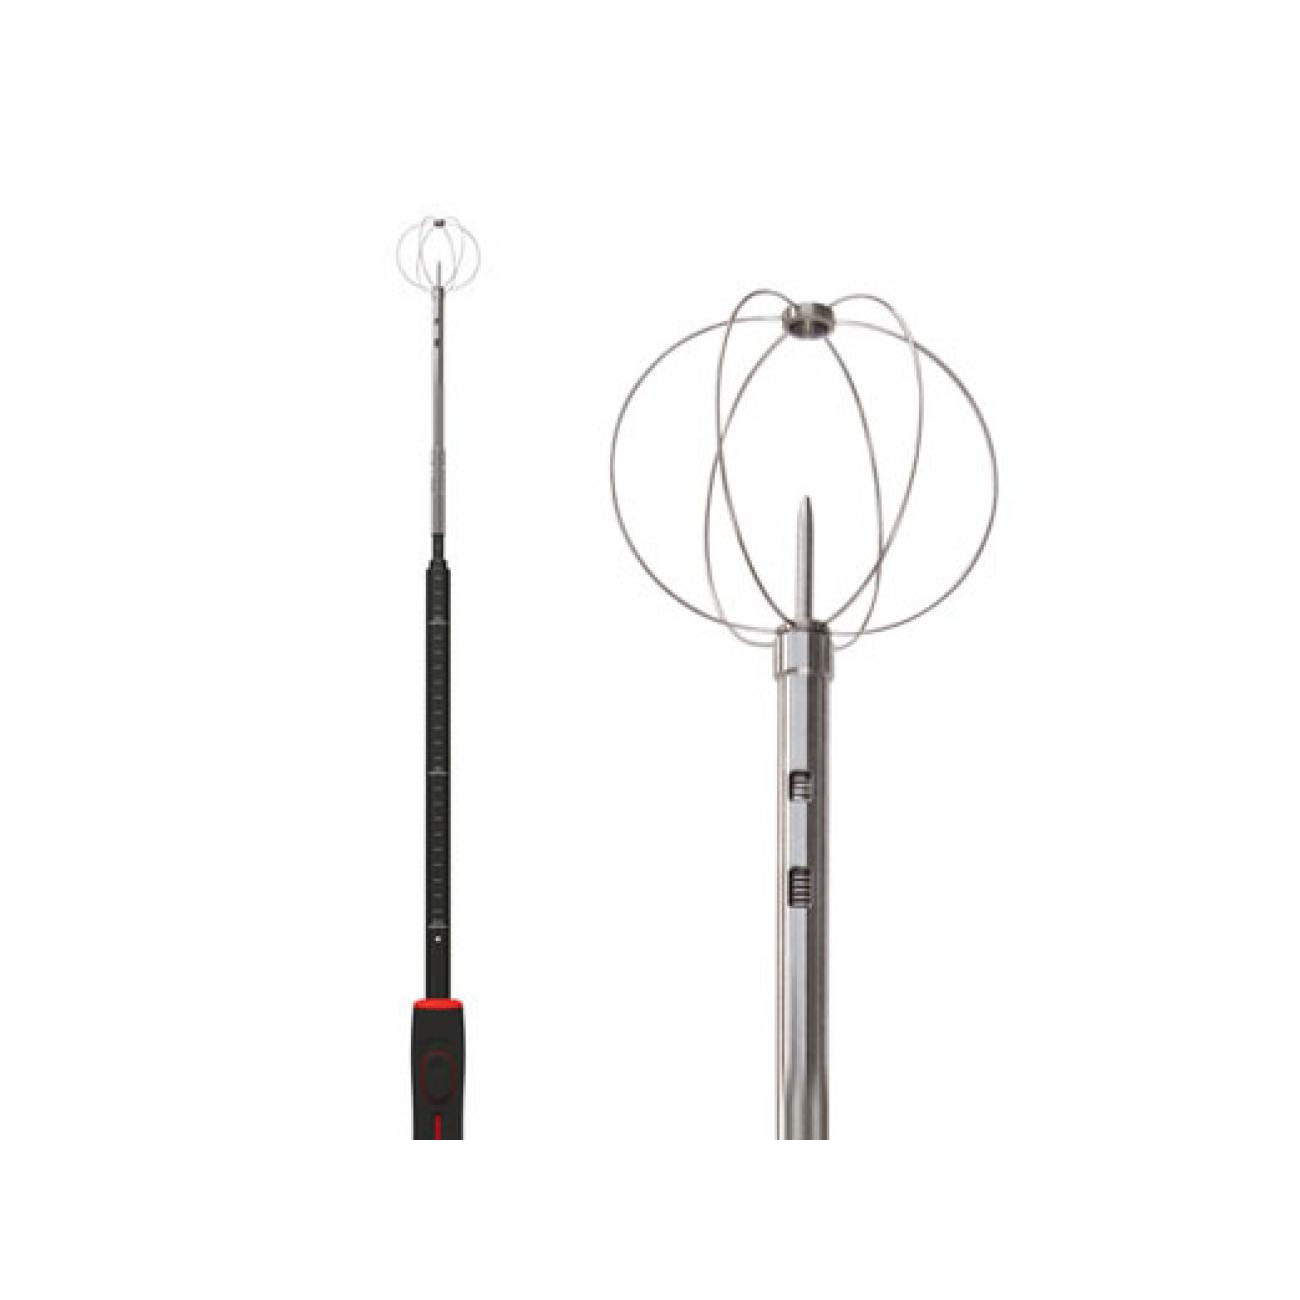 Omnidirectionnel probe SOM 900 For class 210 / 310 multi-function portables